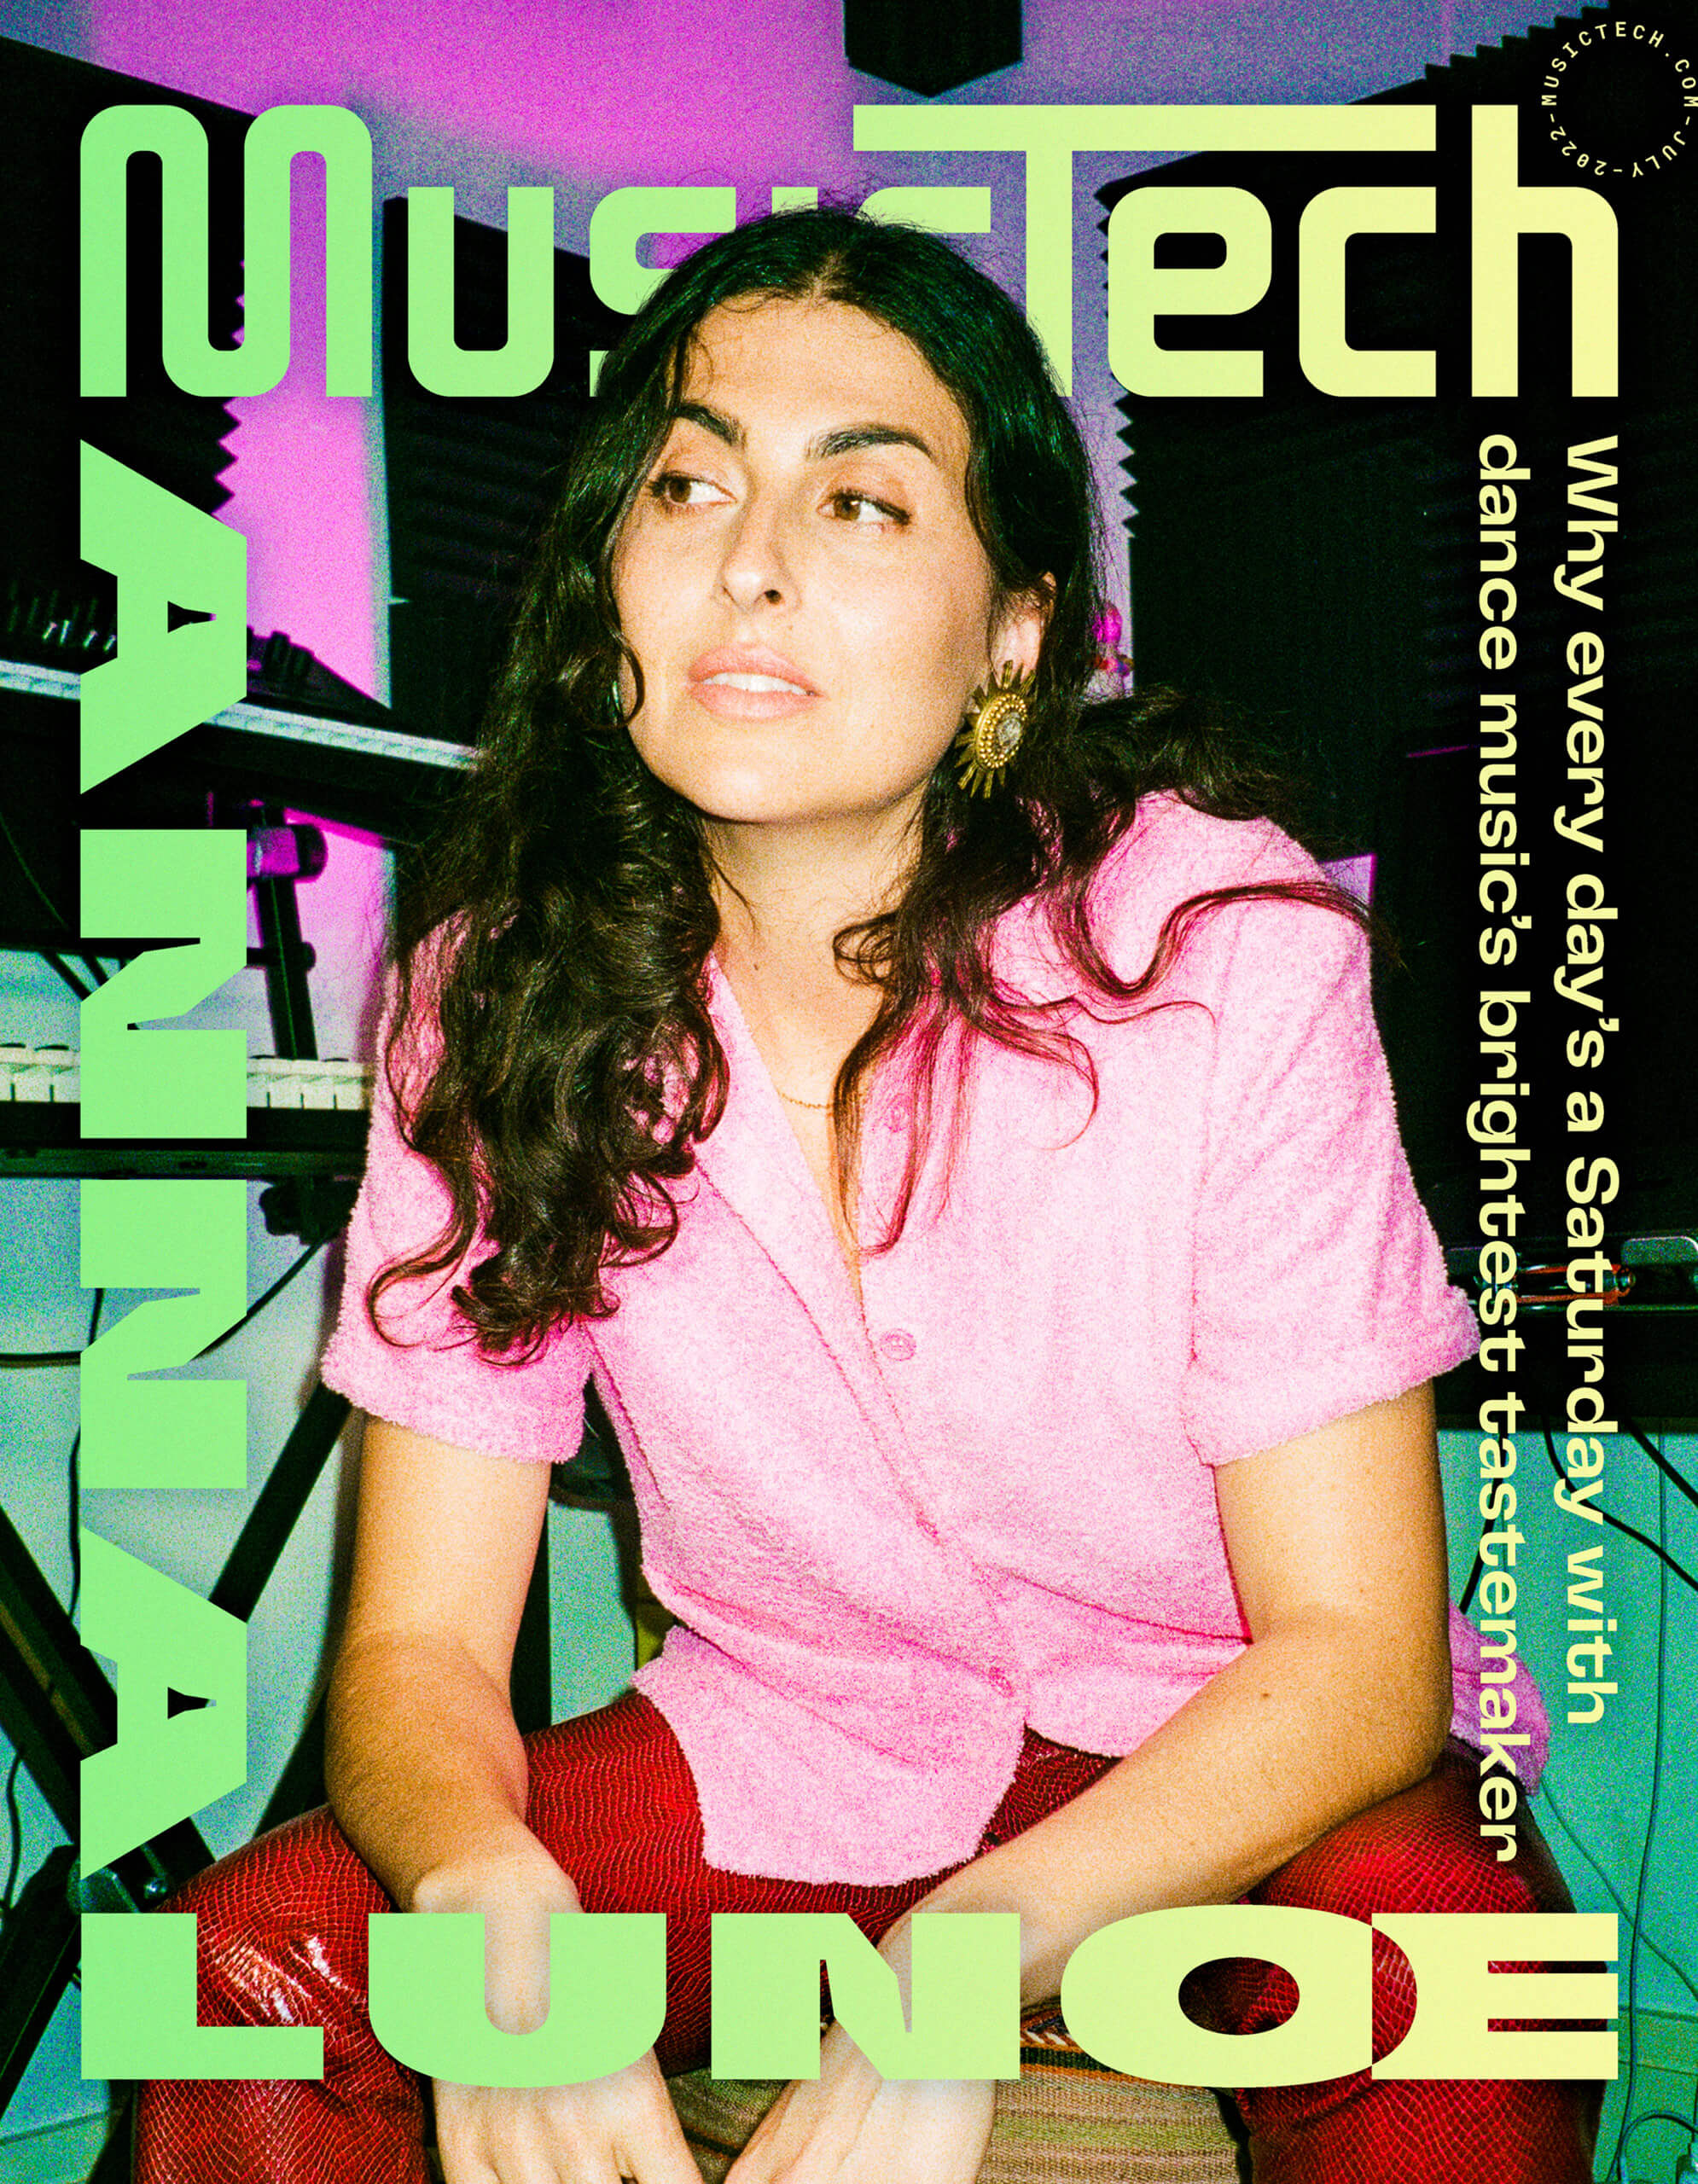 Anna Lunoe on the cover of MusicTech